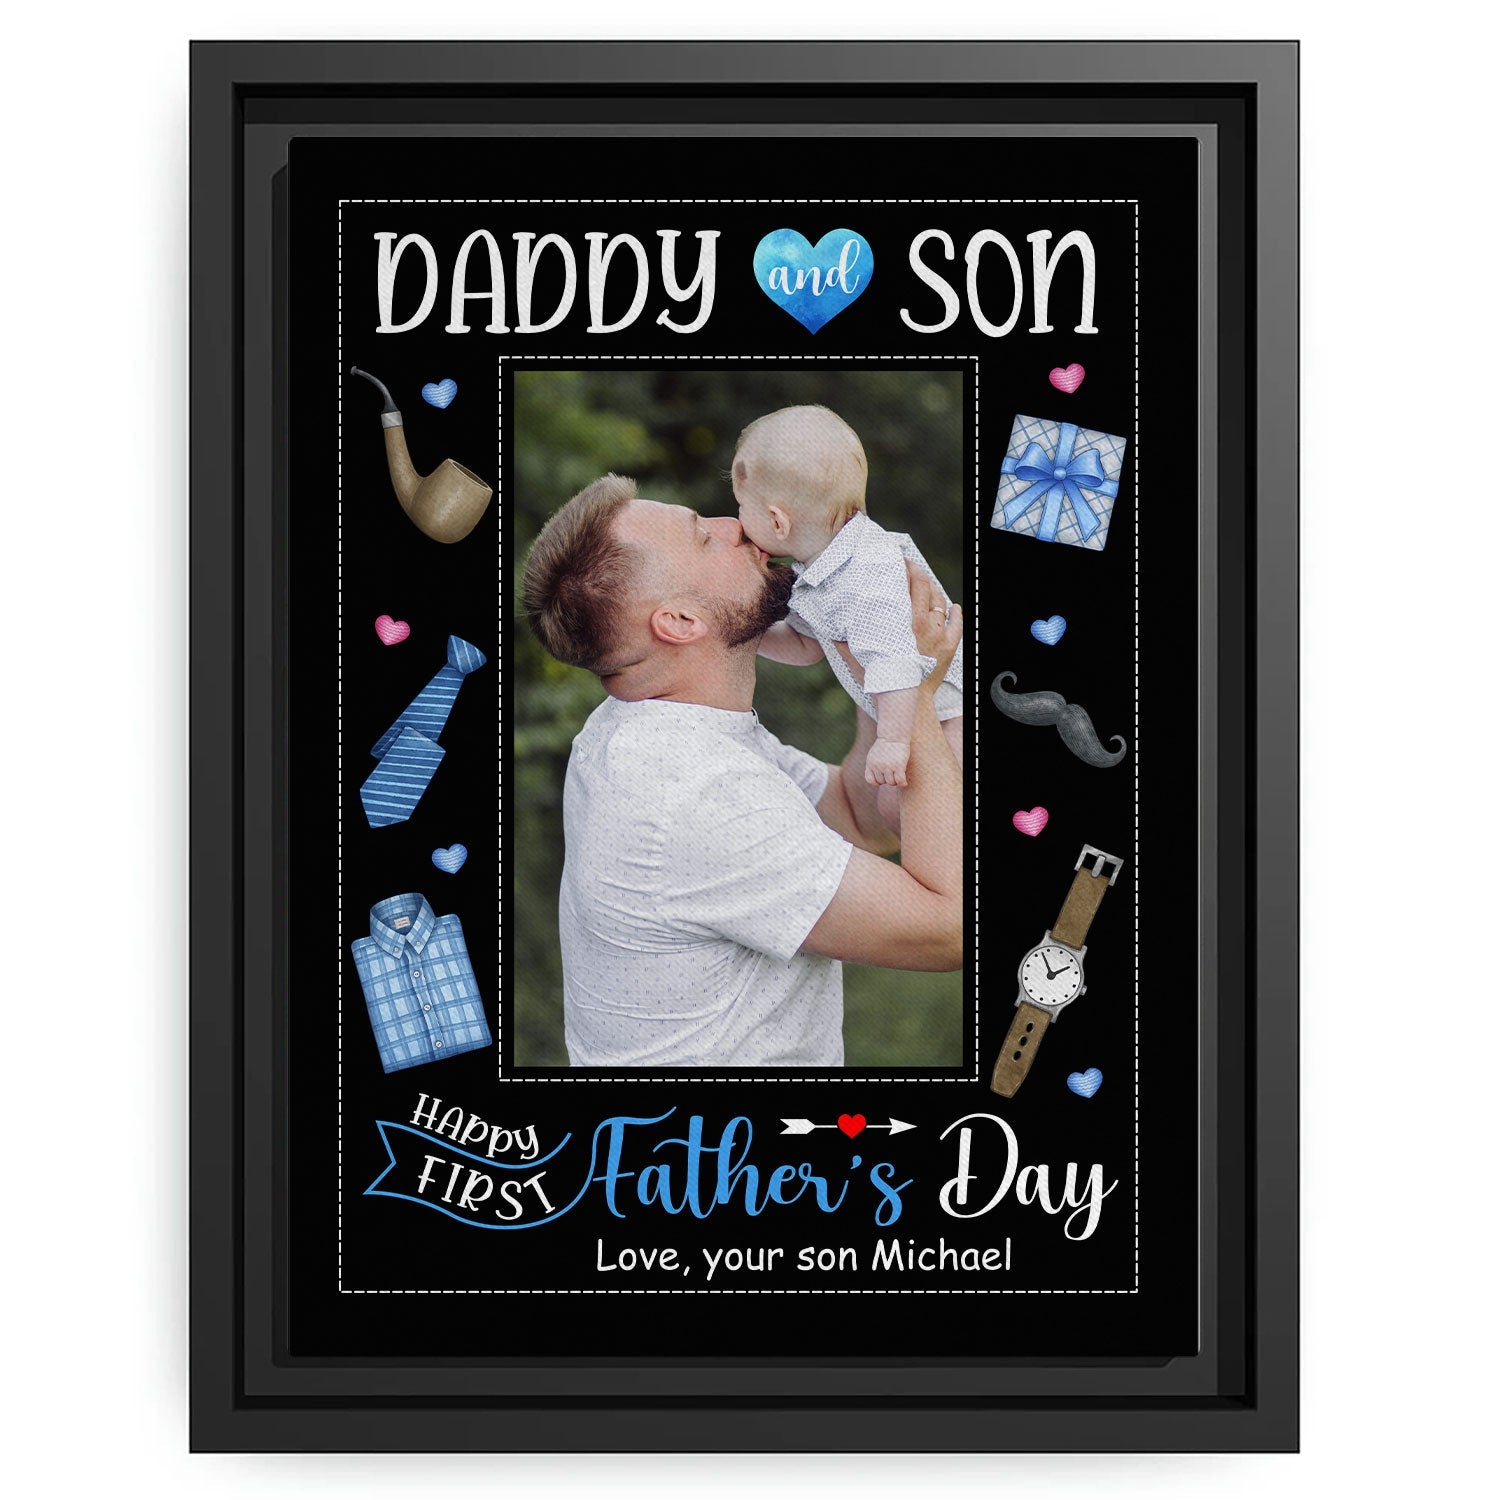 Daddy & Son - Personalized  gift Father Son - Custom Canvas Print - MyMindfulGifts